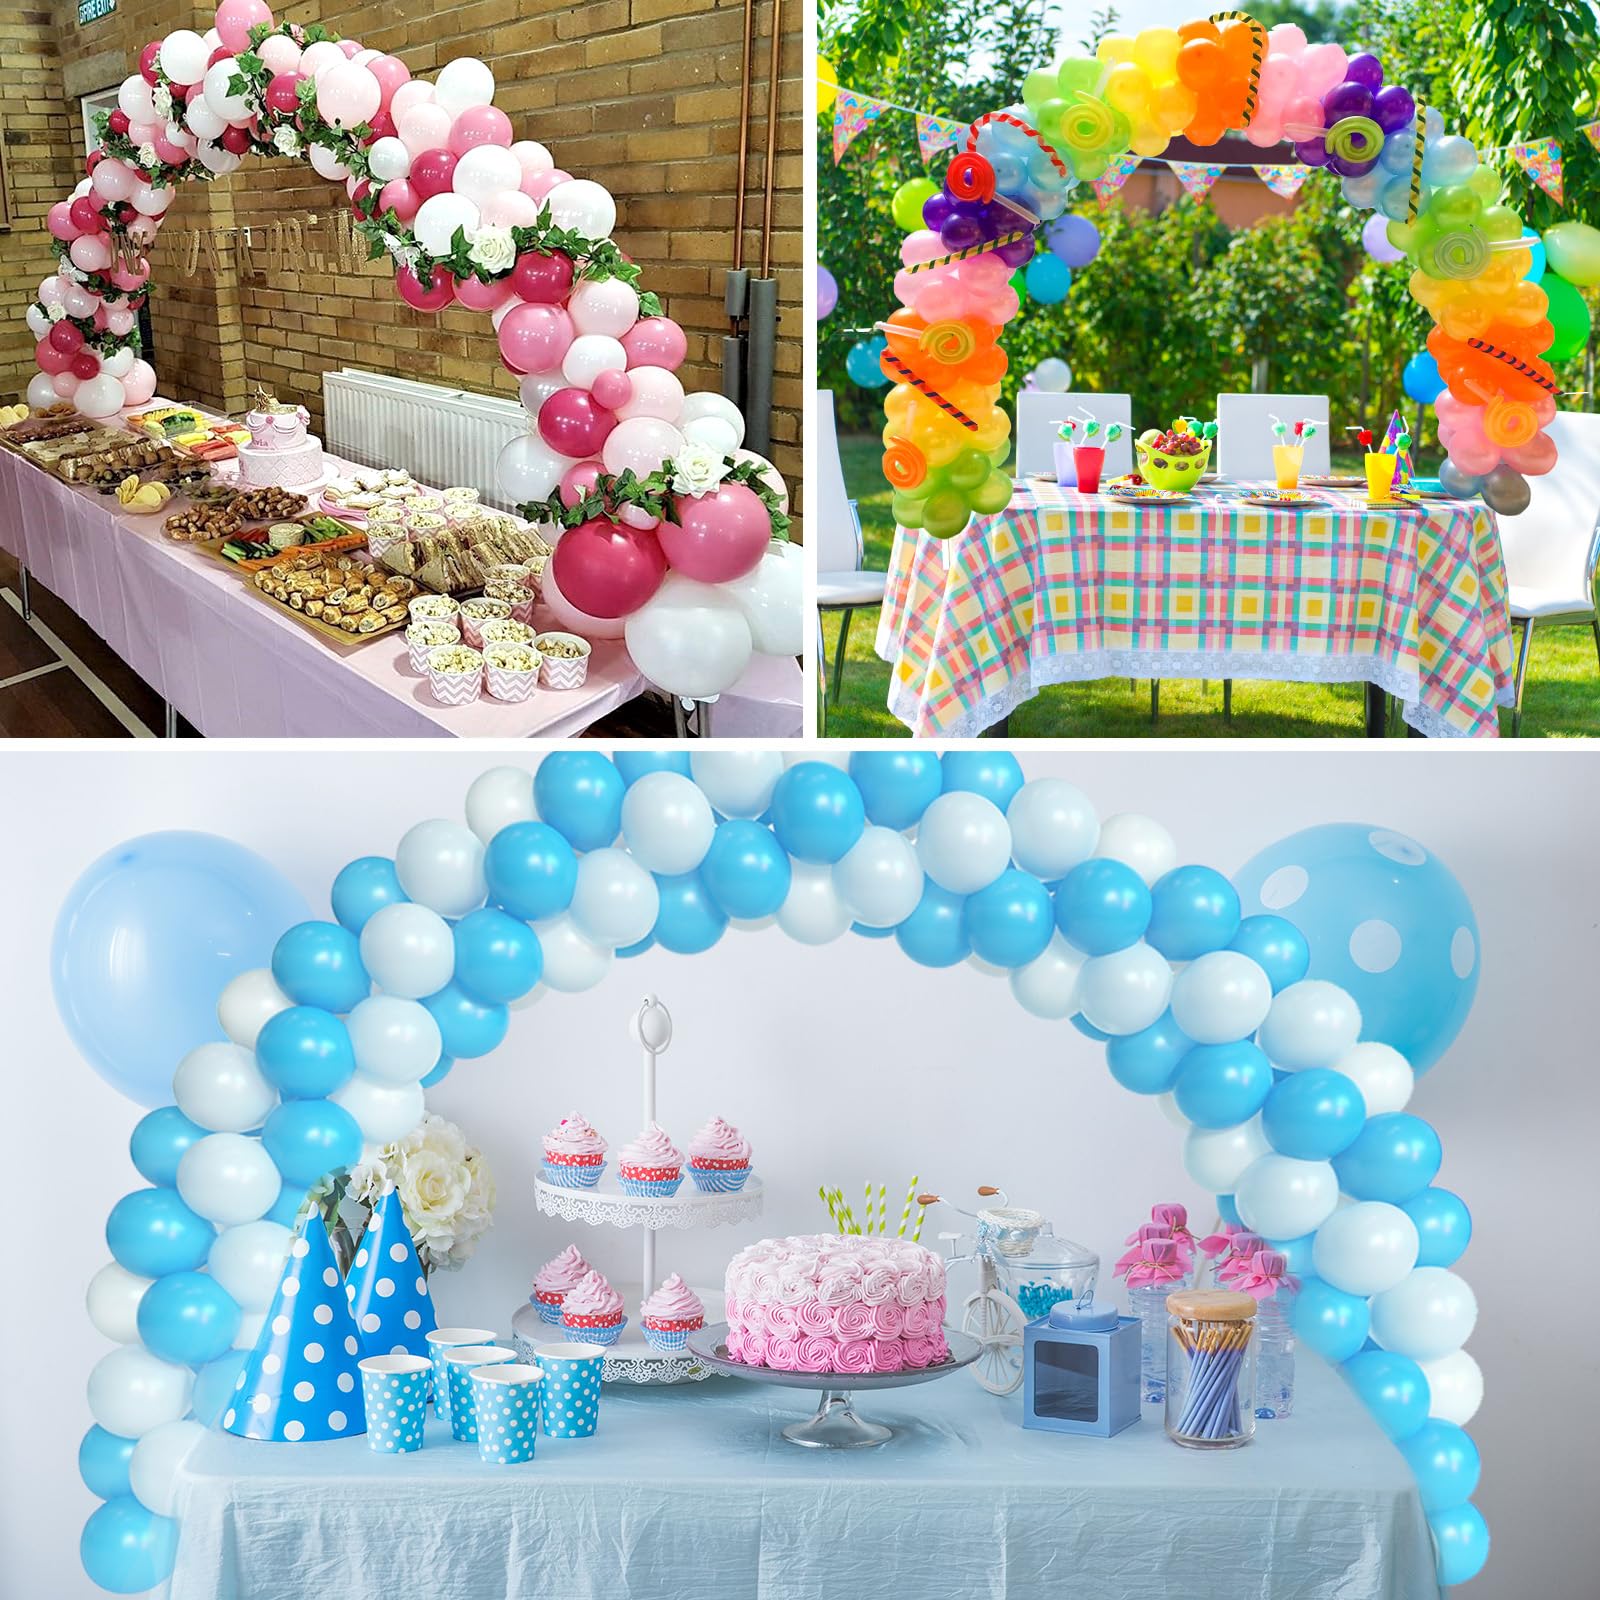 RUBFAC Balloon Arch Kit and Electric Balloon Pump, Balloon Arch Stand for Table Adjustable Frame with Electric Pump Bases Party Balloon Accessories for Birthday Party Baby Shower Festival Decorations